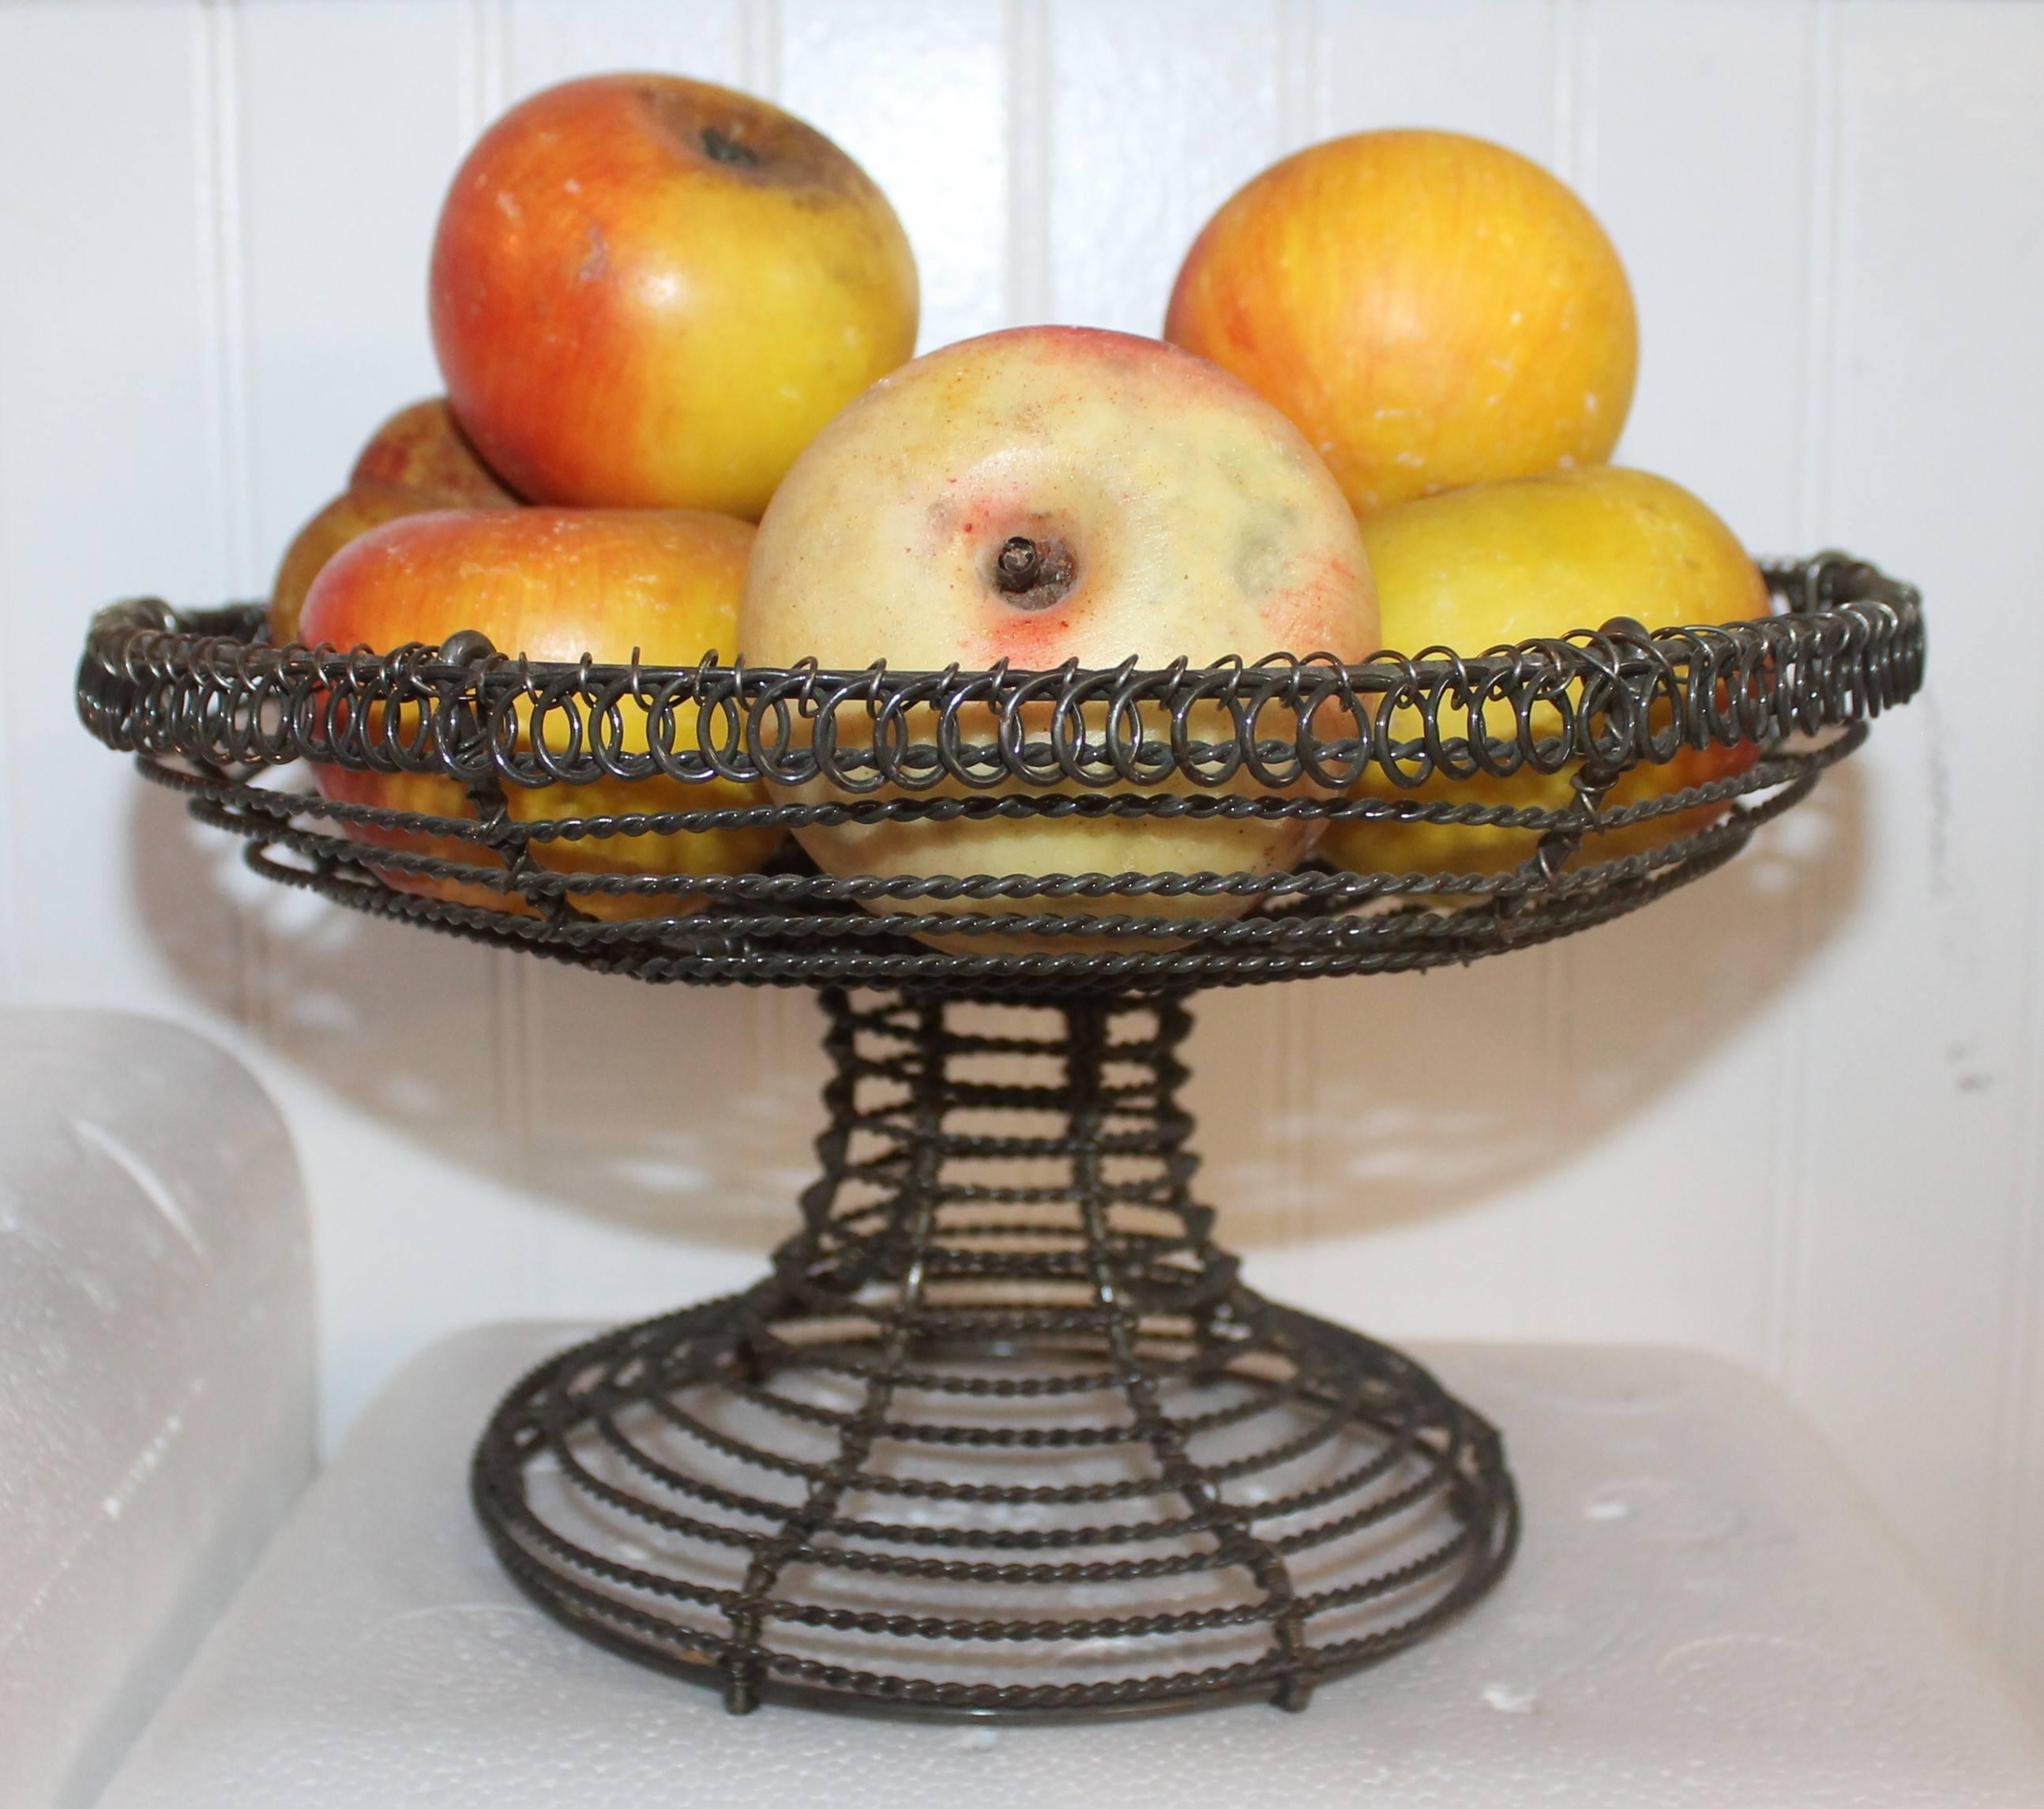 This fantastic 19th century handmade wire compote is filled with vintage stone apples. All in very good condition. Total of nine apples. Sold as a collection.